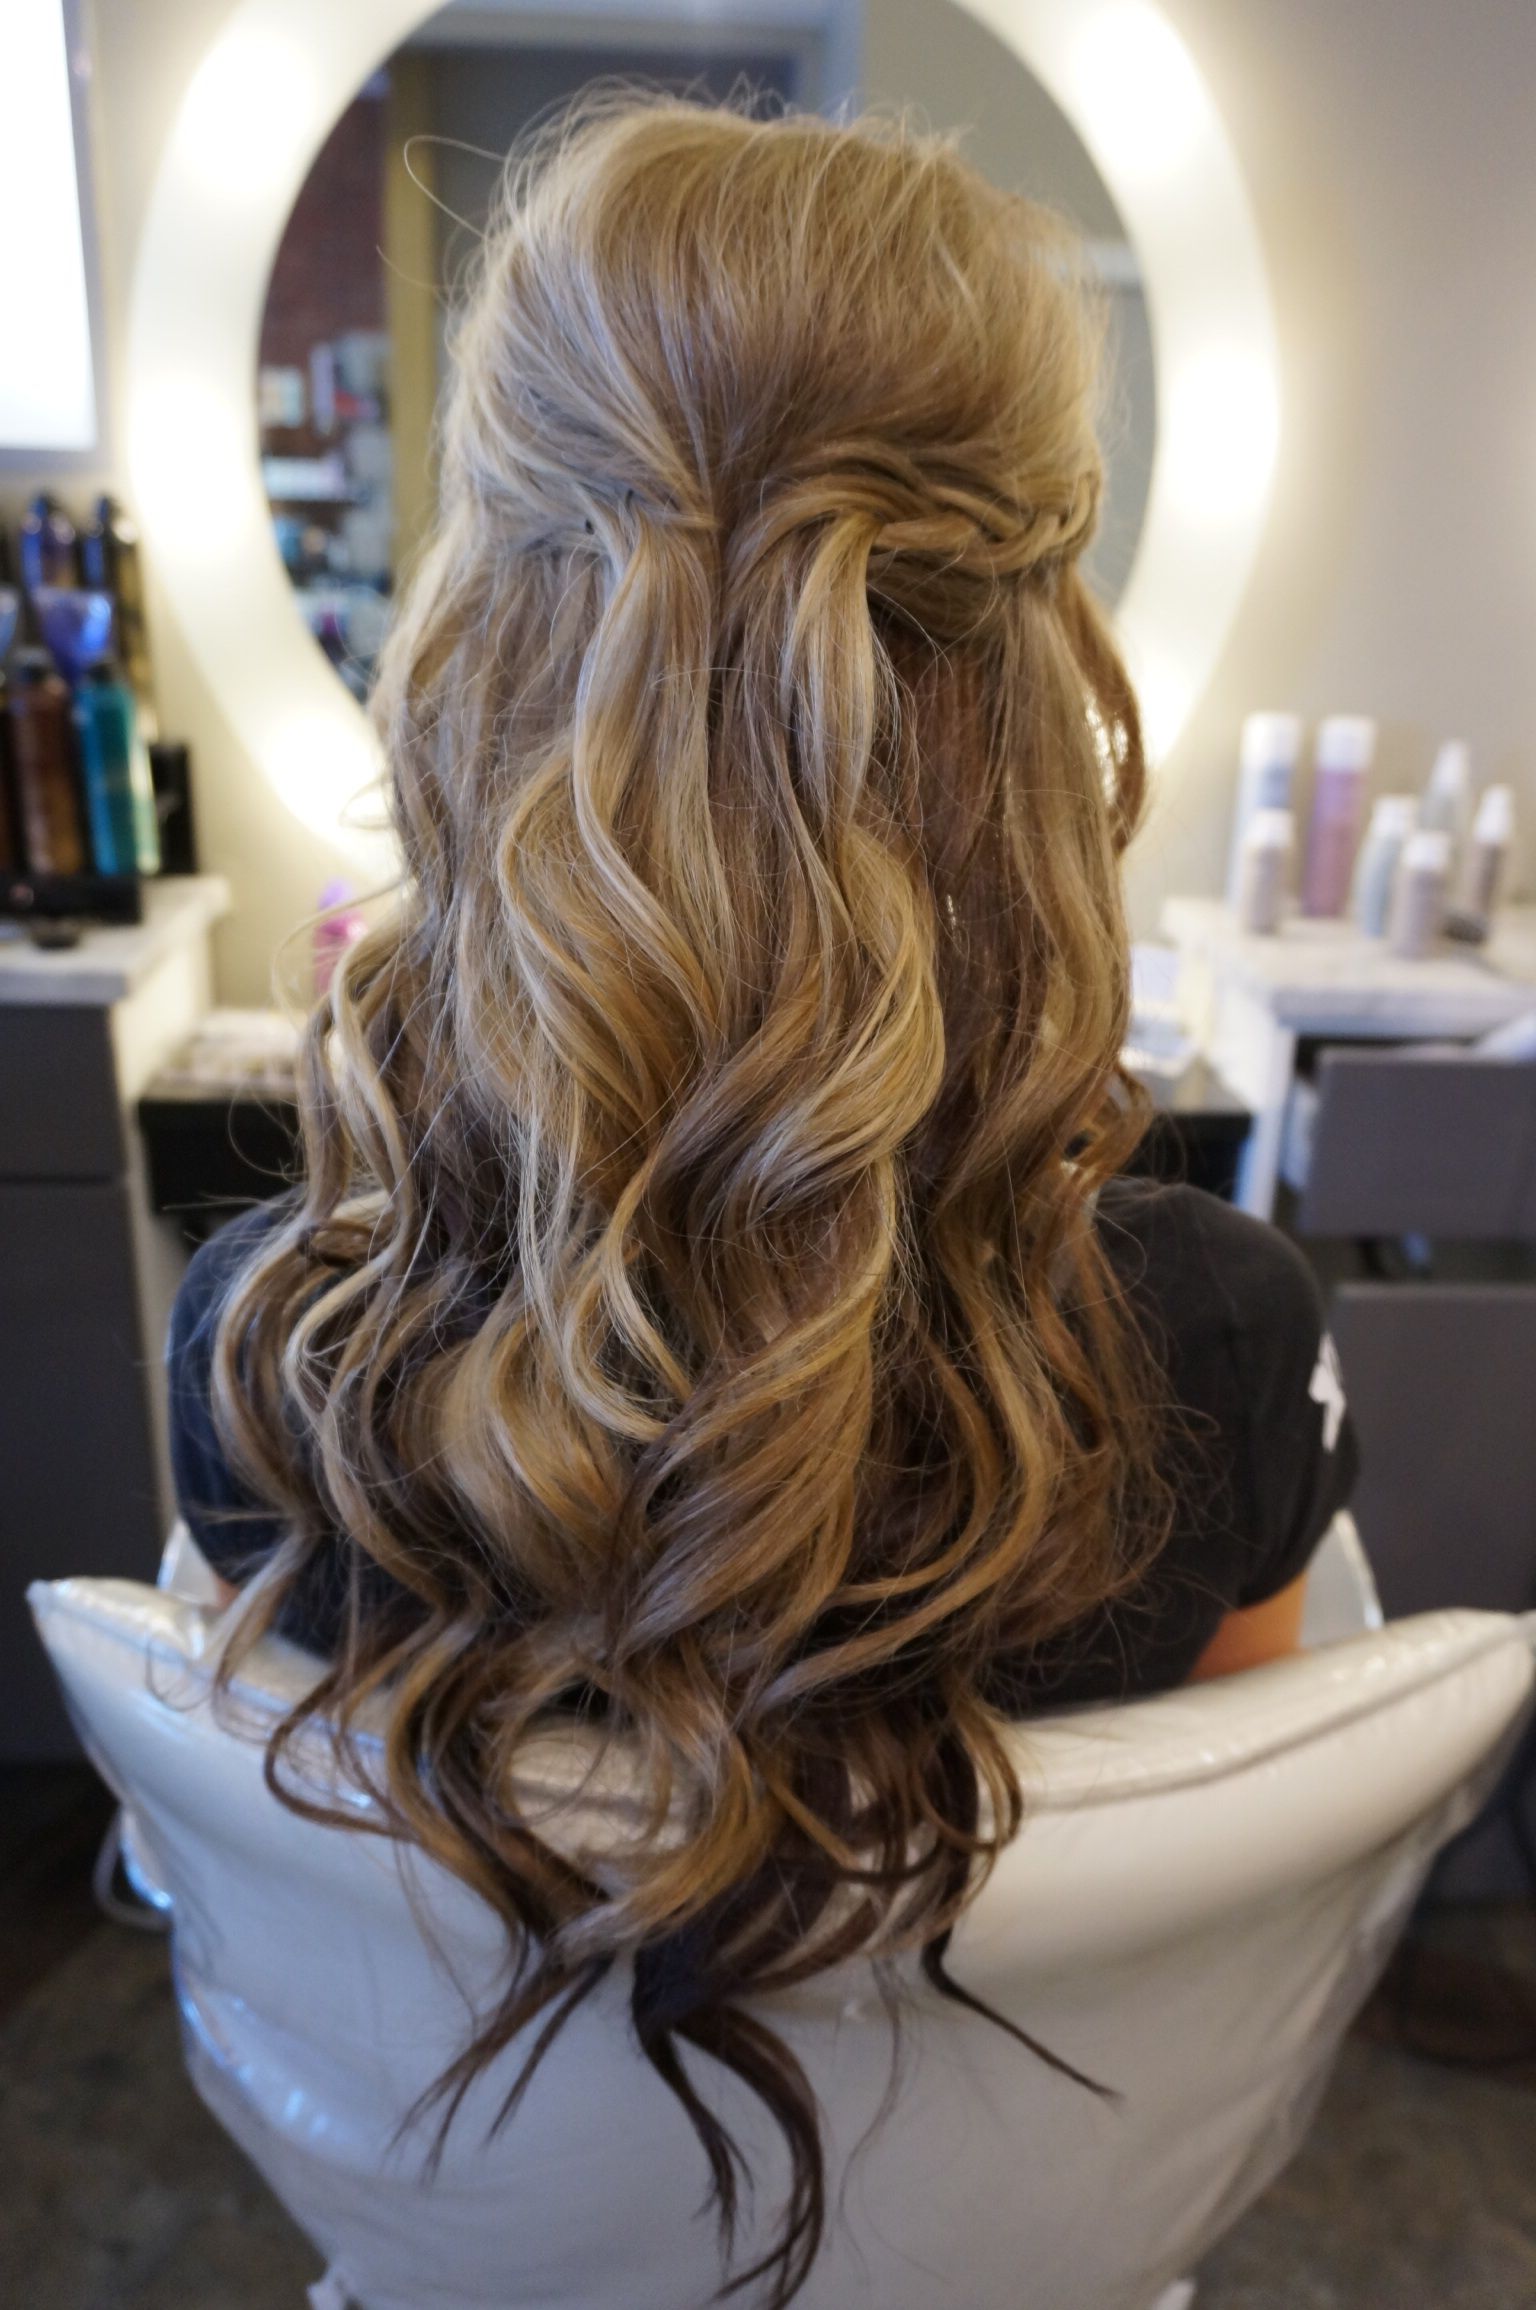 Long Hair With Loose Curls Perfect Half Up Half Down Style! Follow Regarding Curly Half Updo Hairstyles (View 1 of 15)